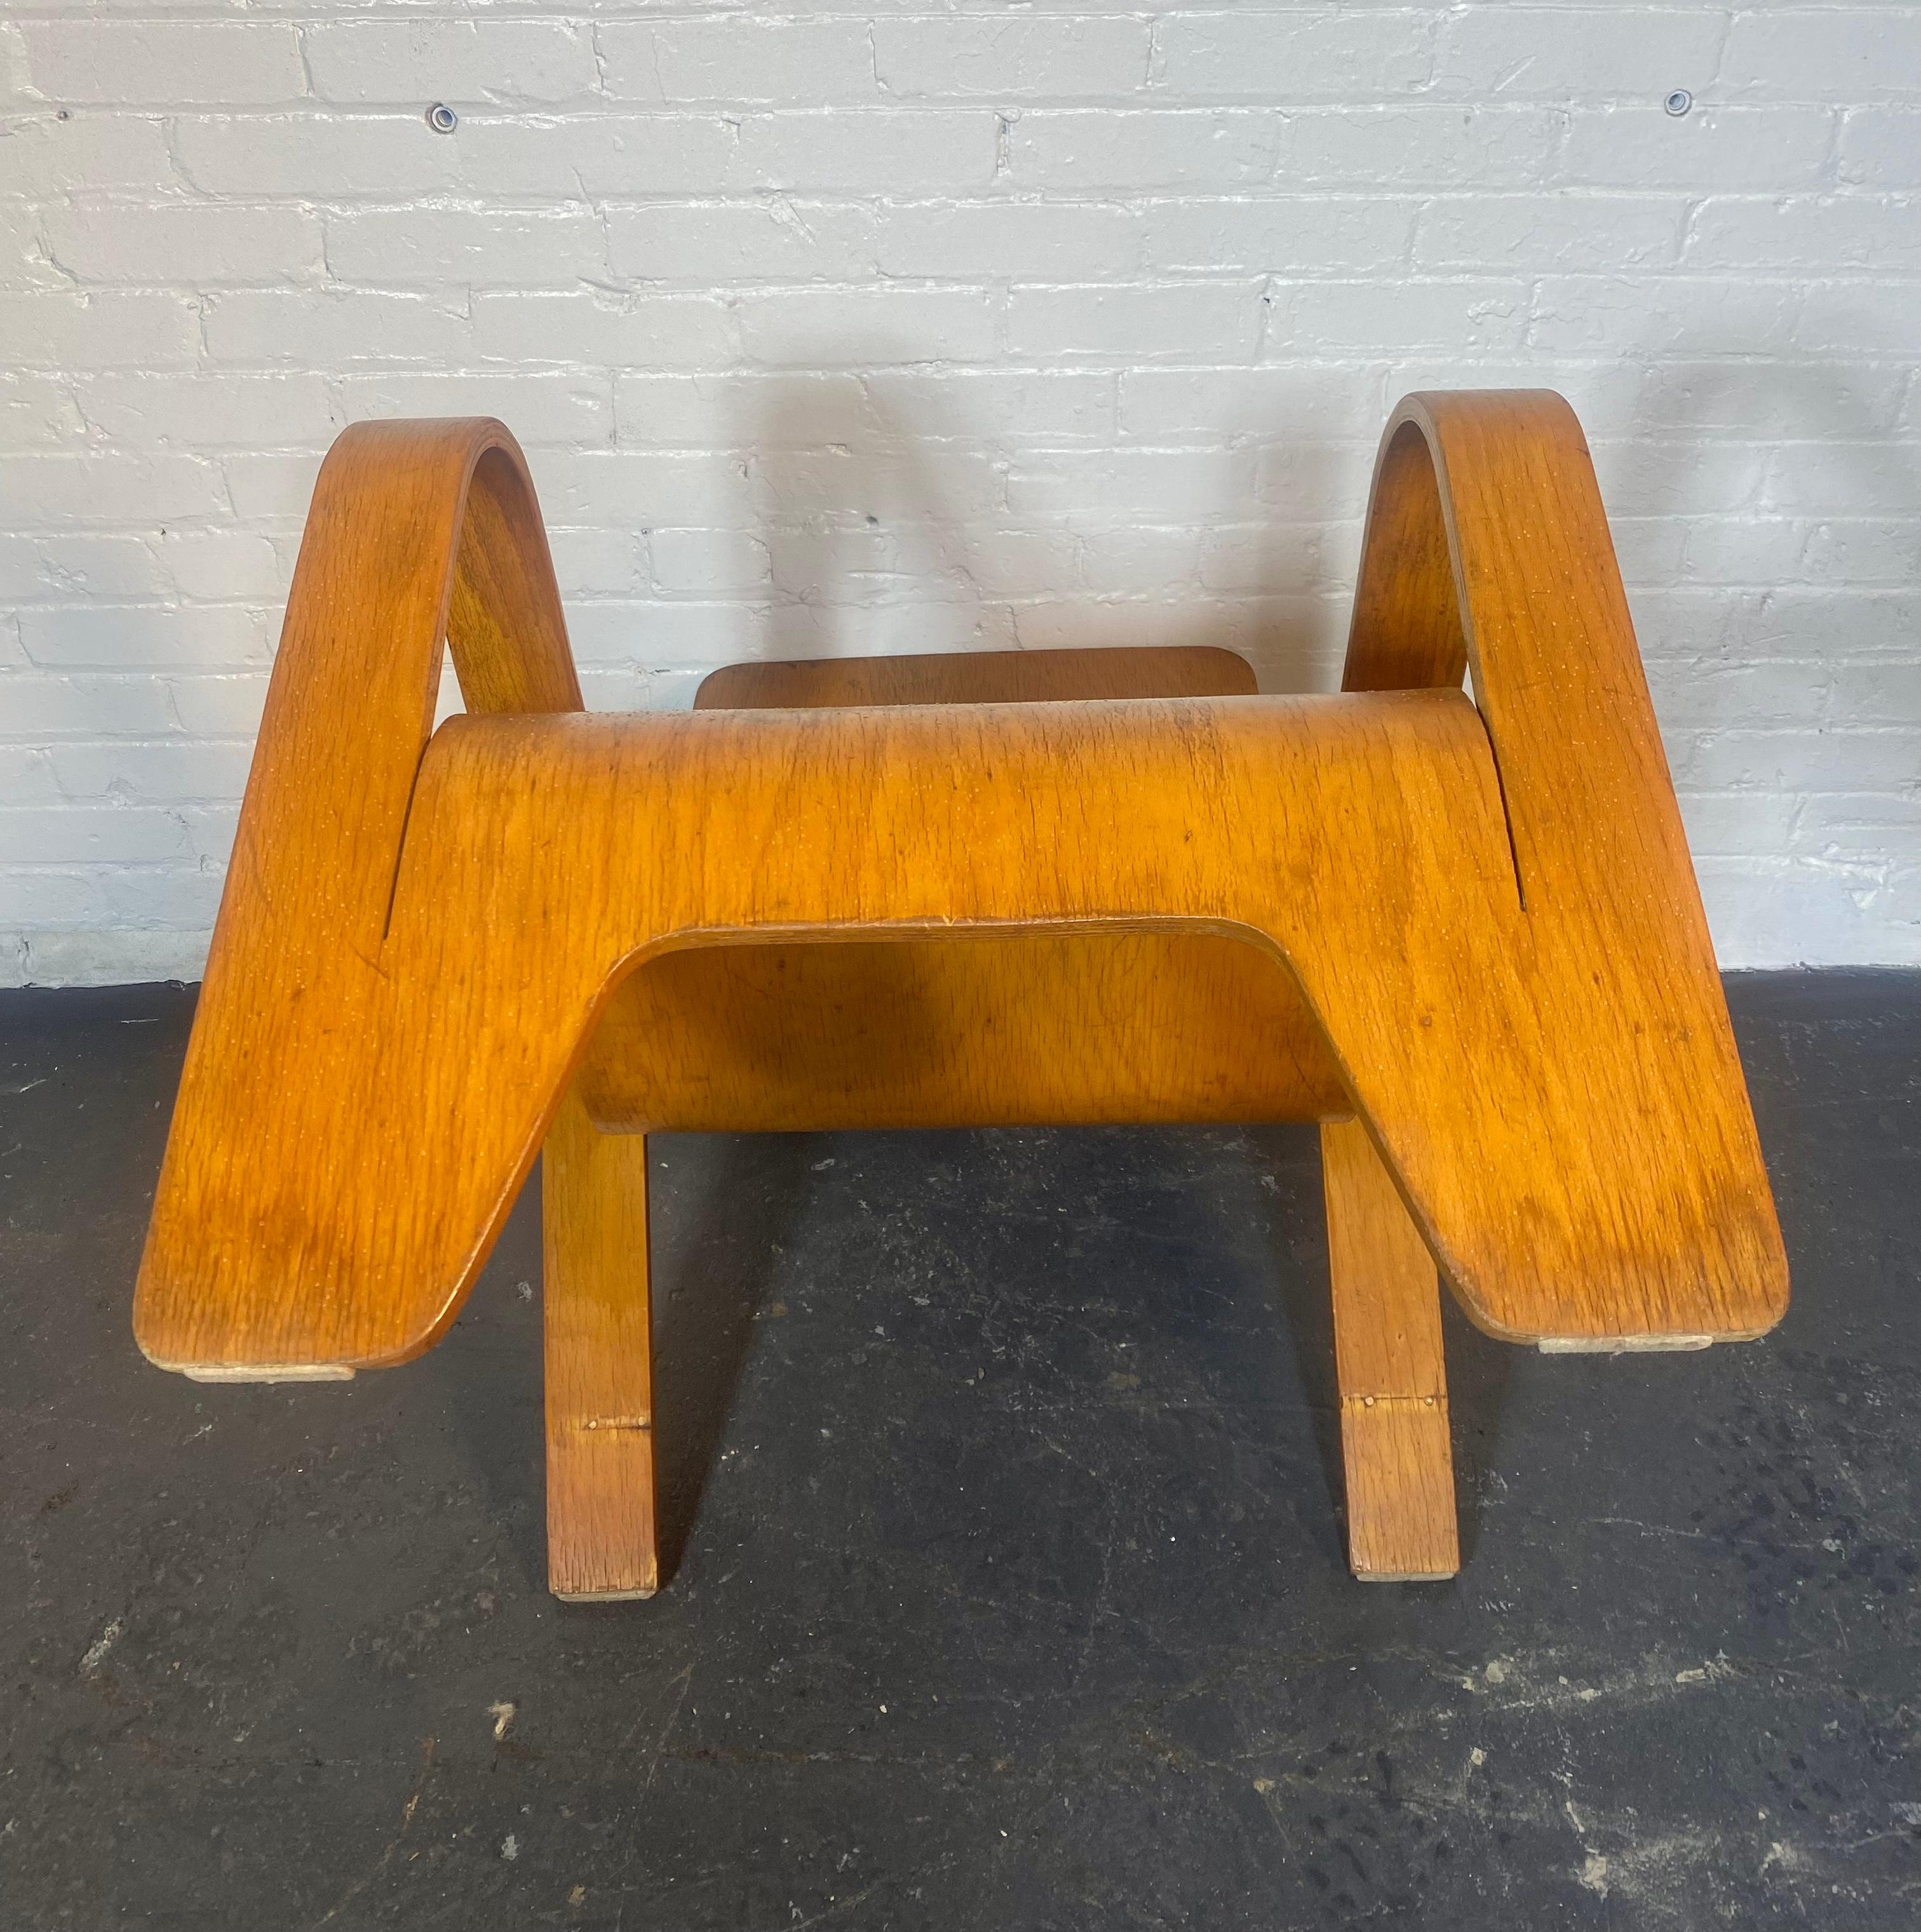 Mid-Century Modern LaWo1 Molded Plywood Lounge Chair by Han Pieck for Lawo Ommen/ Netherlands 1945 For Sale